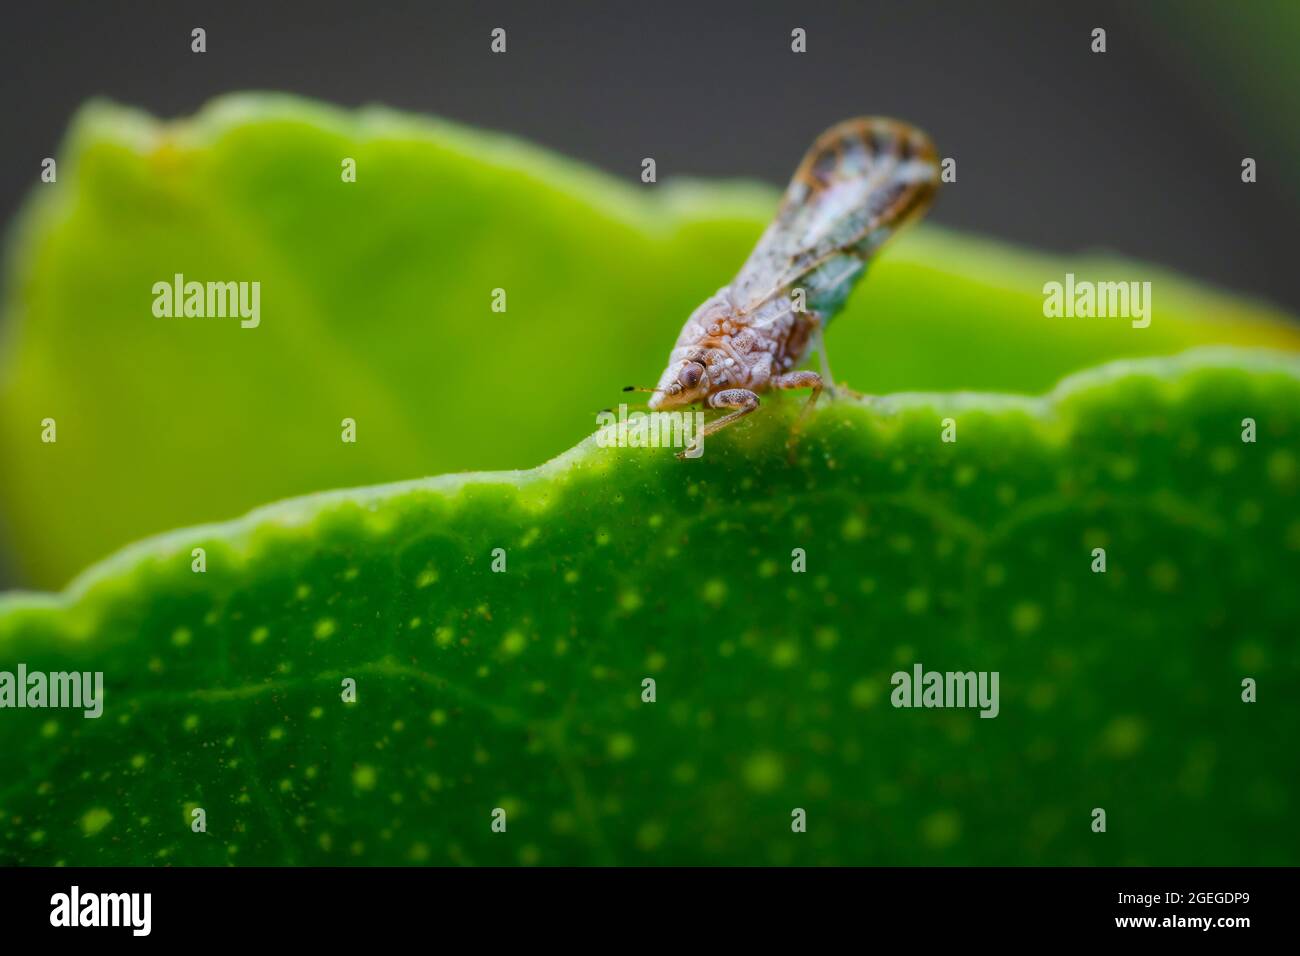 Asian citrus psyllid on the edge of lemon plant leaf. Its scientific name is Diaphorina citri which one of the vectors of citrus greening disease has Stock Photo